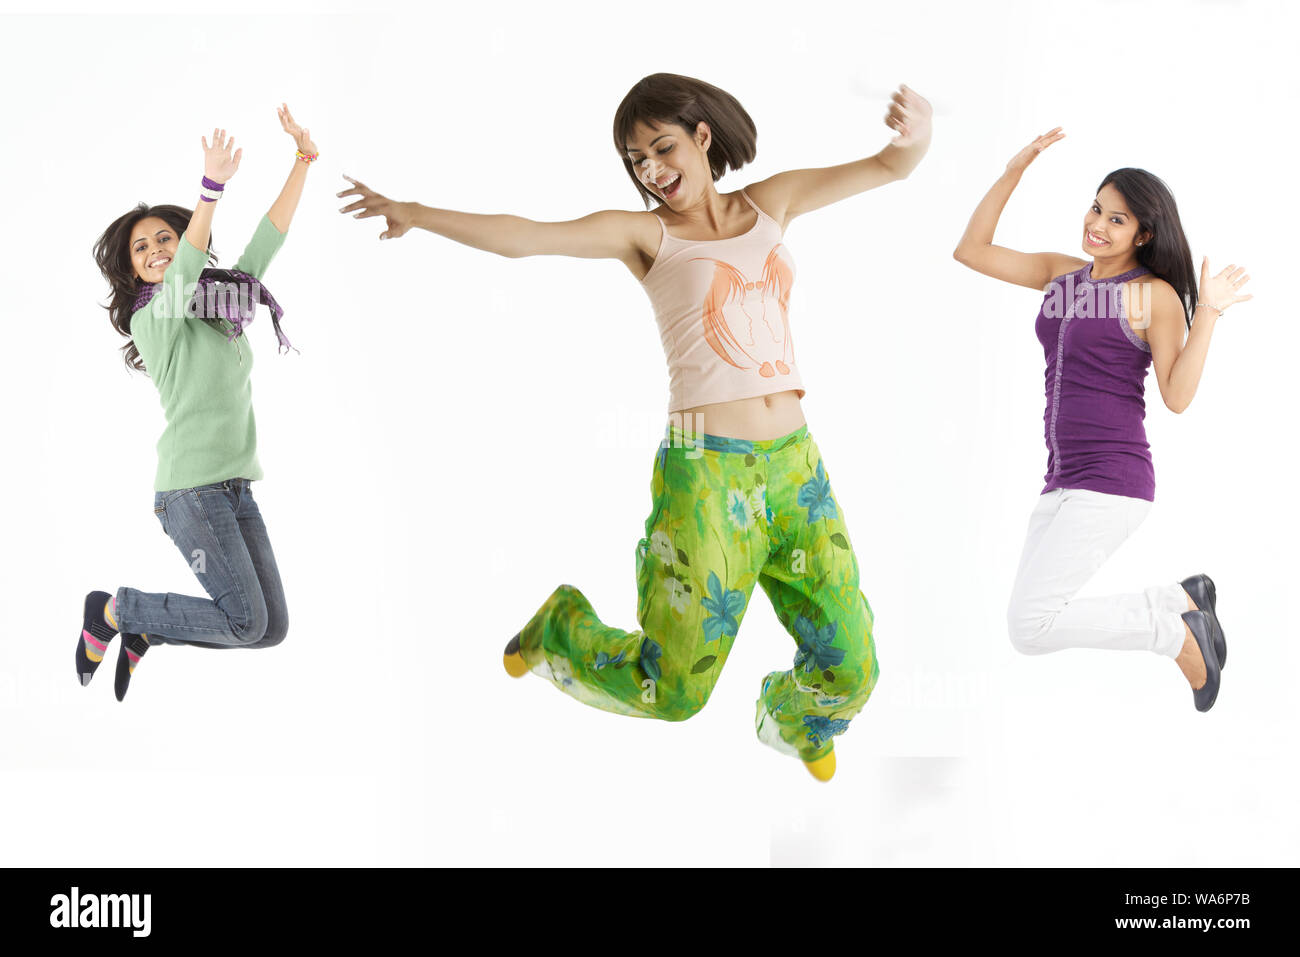 Young women jumping in mid air and smiling Stock Photo